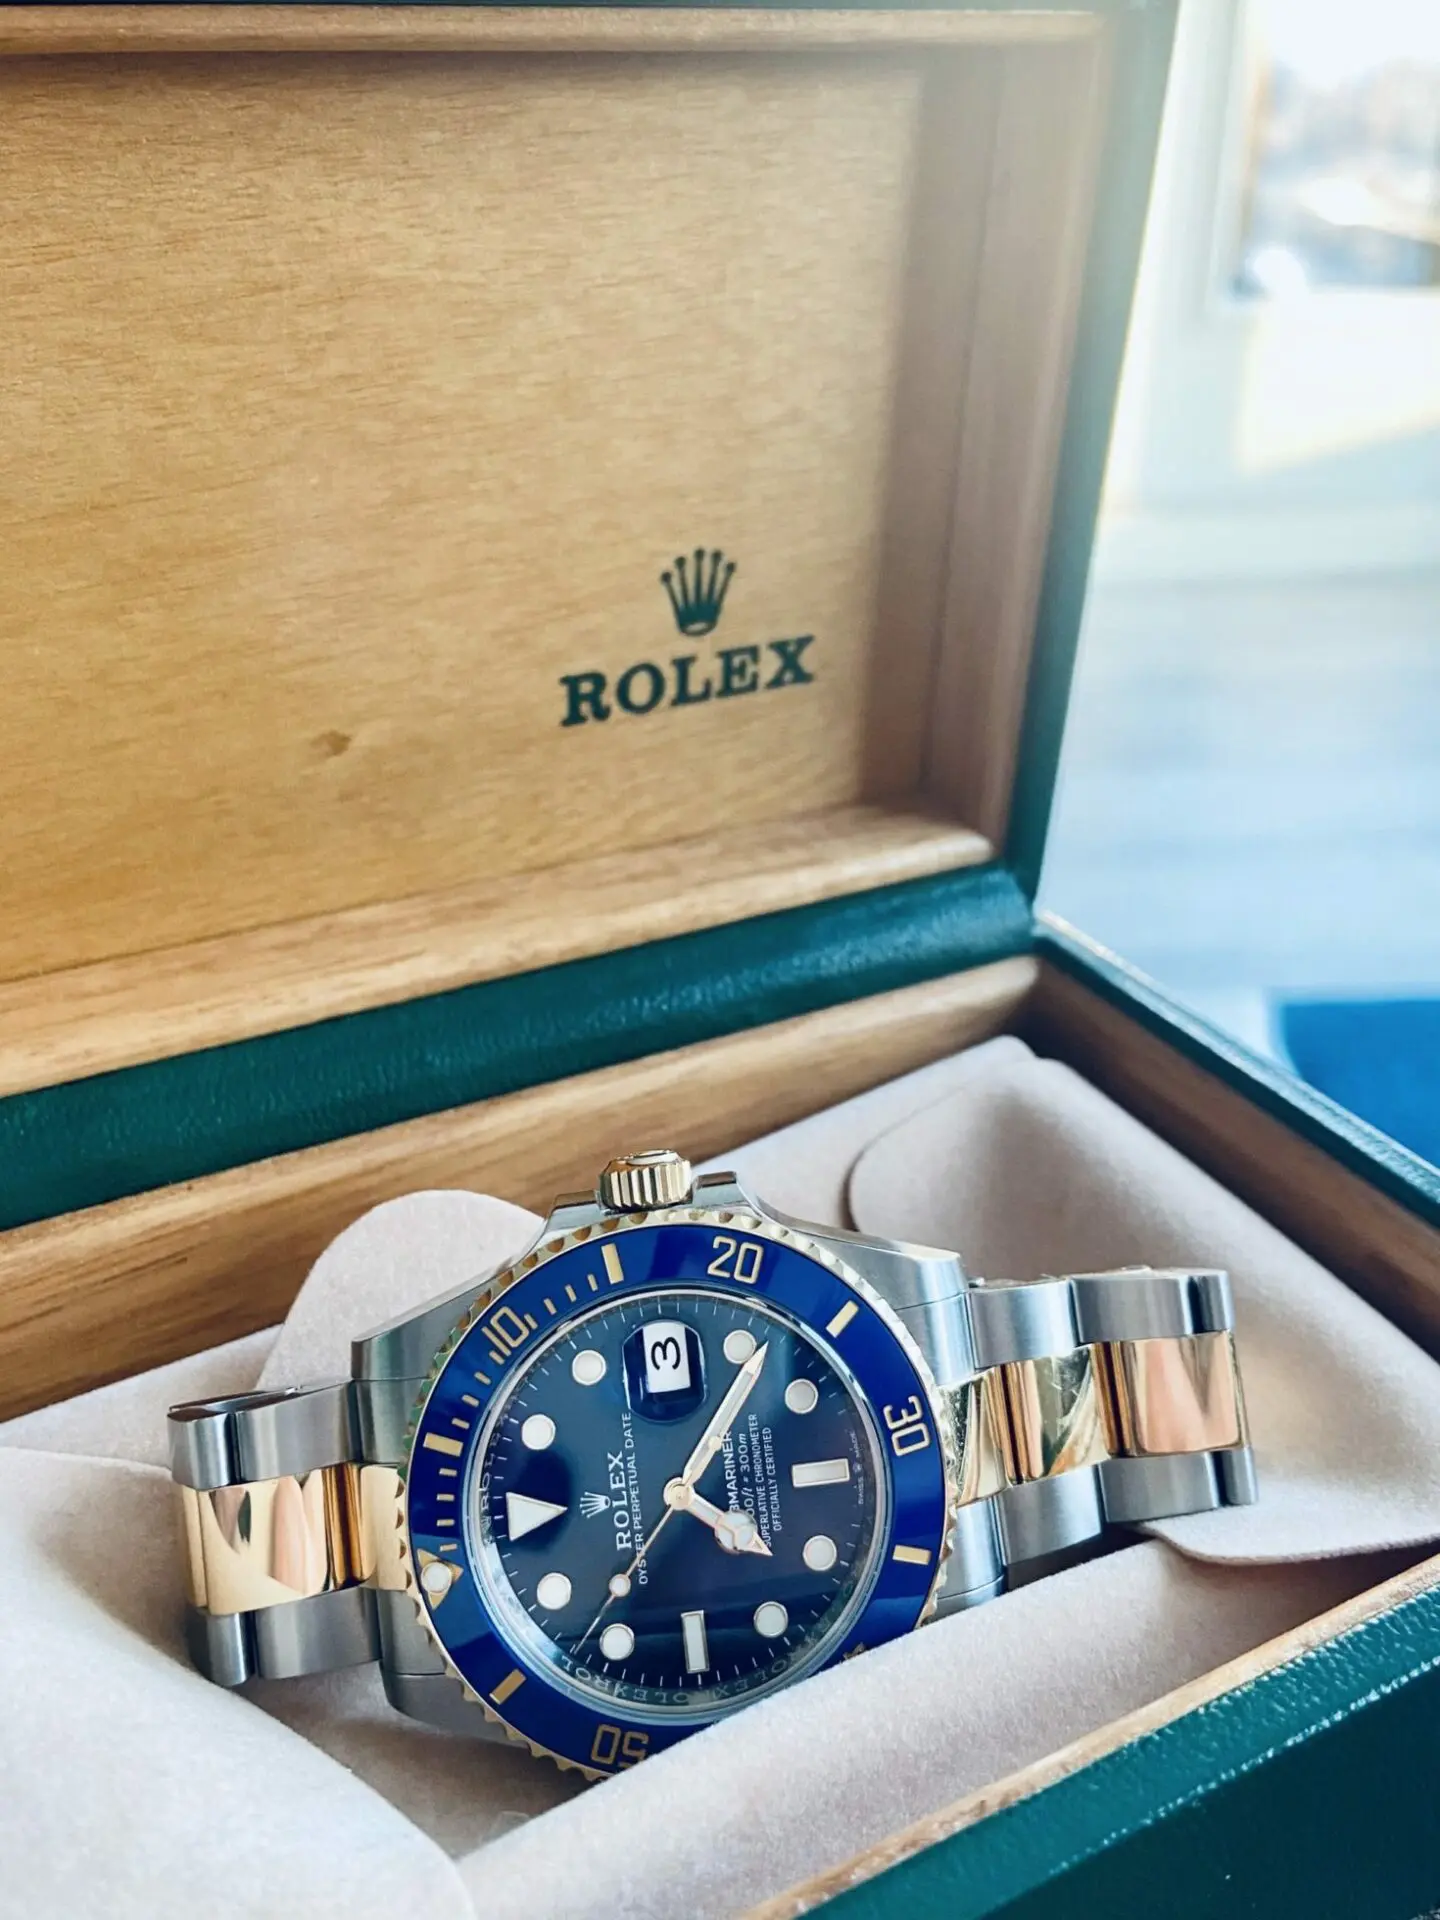 My Wife Won't Let Me Borrow Her Rolex